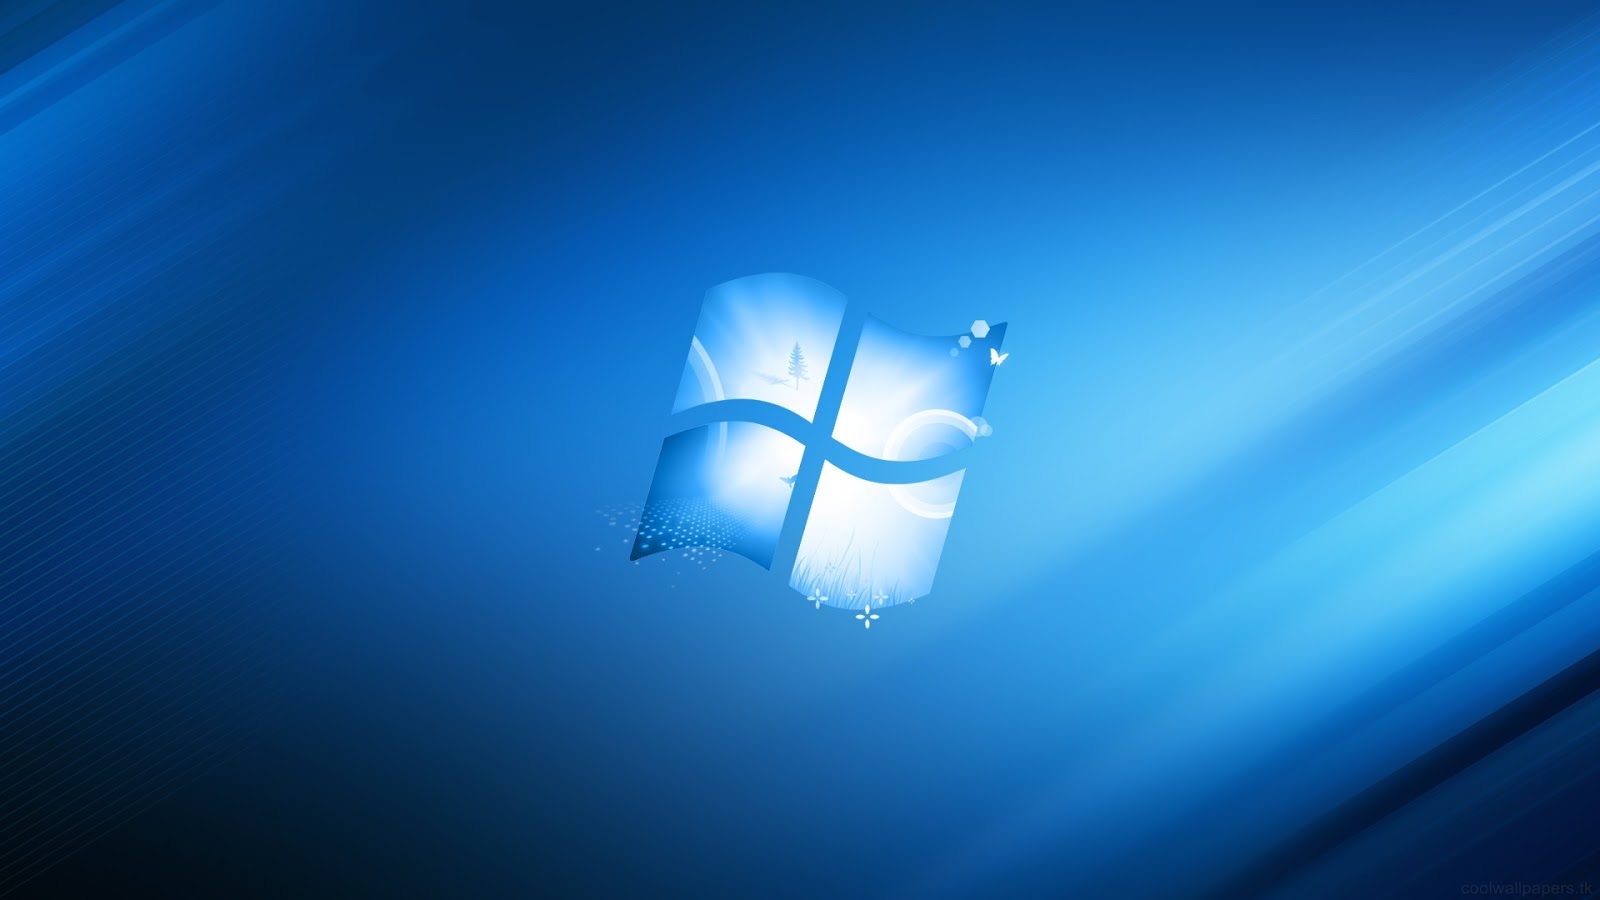 HD Windows Wallpaper Top Background For Xp